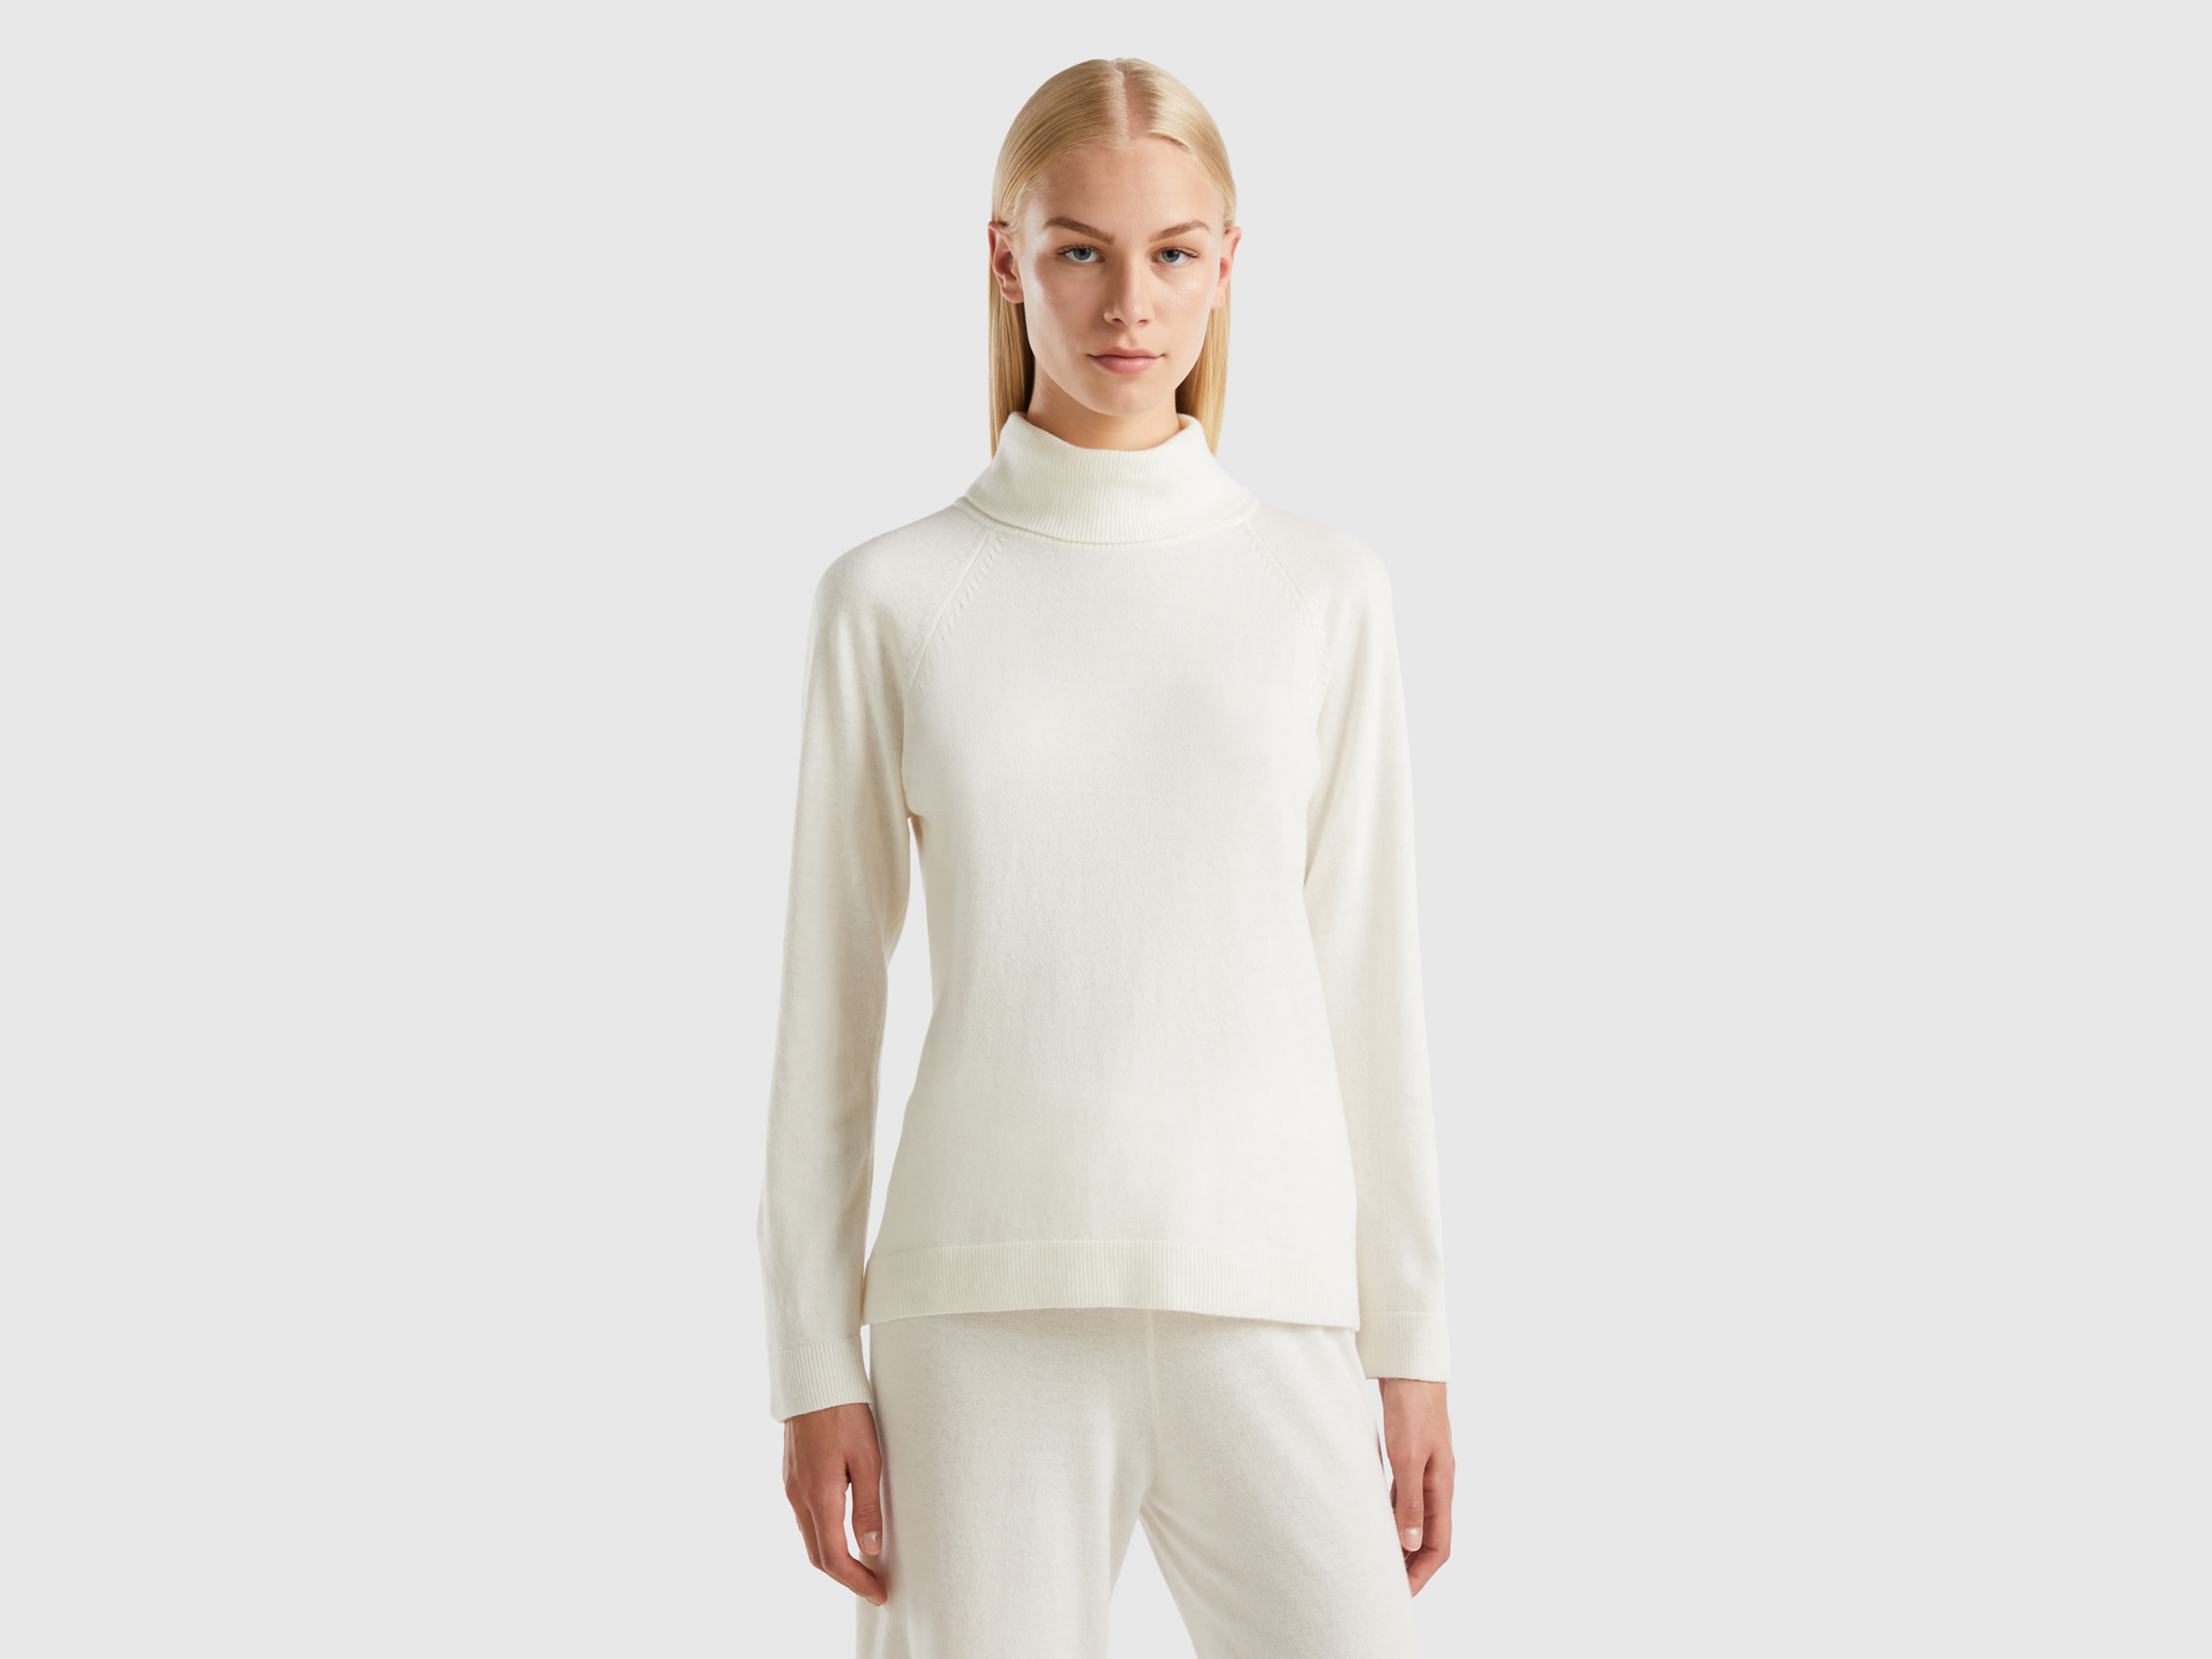 Benetton, White Turtleneck Sweater In Cashmere And Wool Blend, size XS, Creamy White, Women